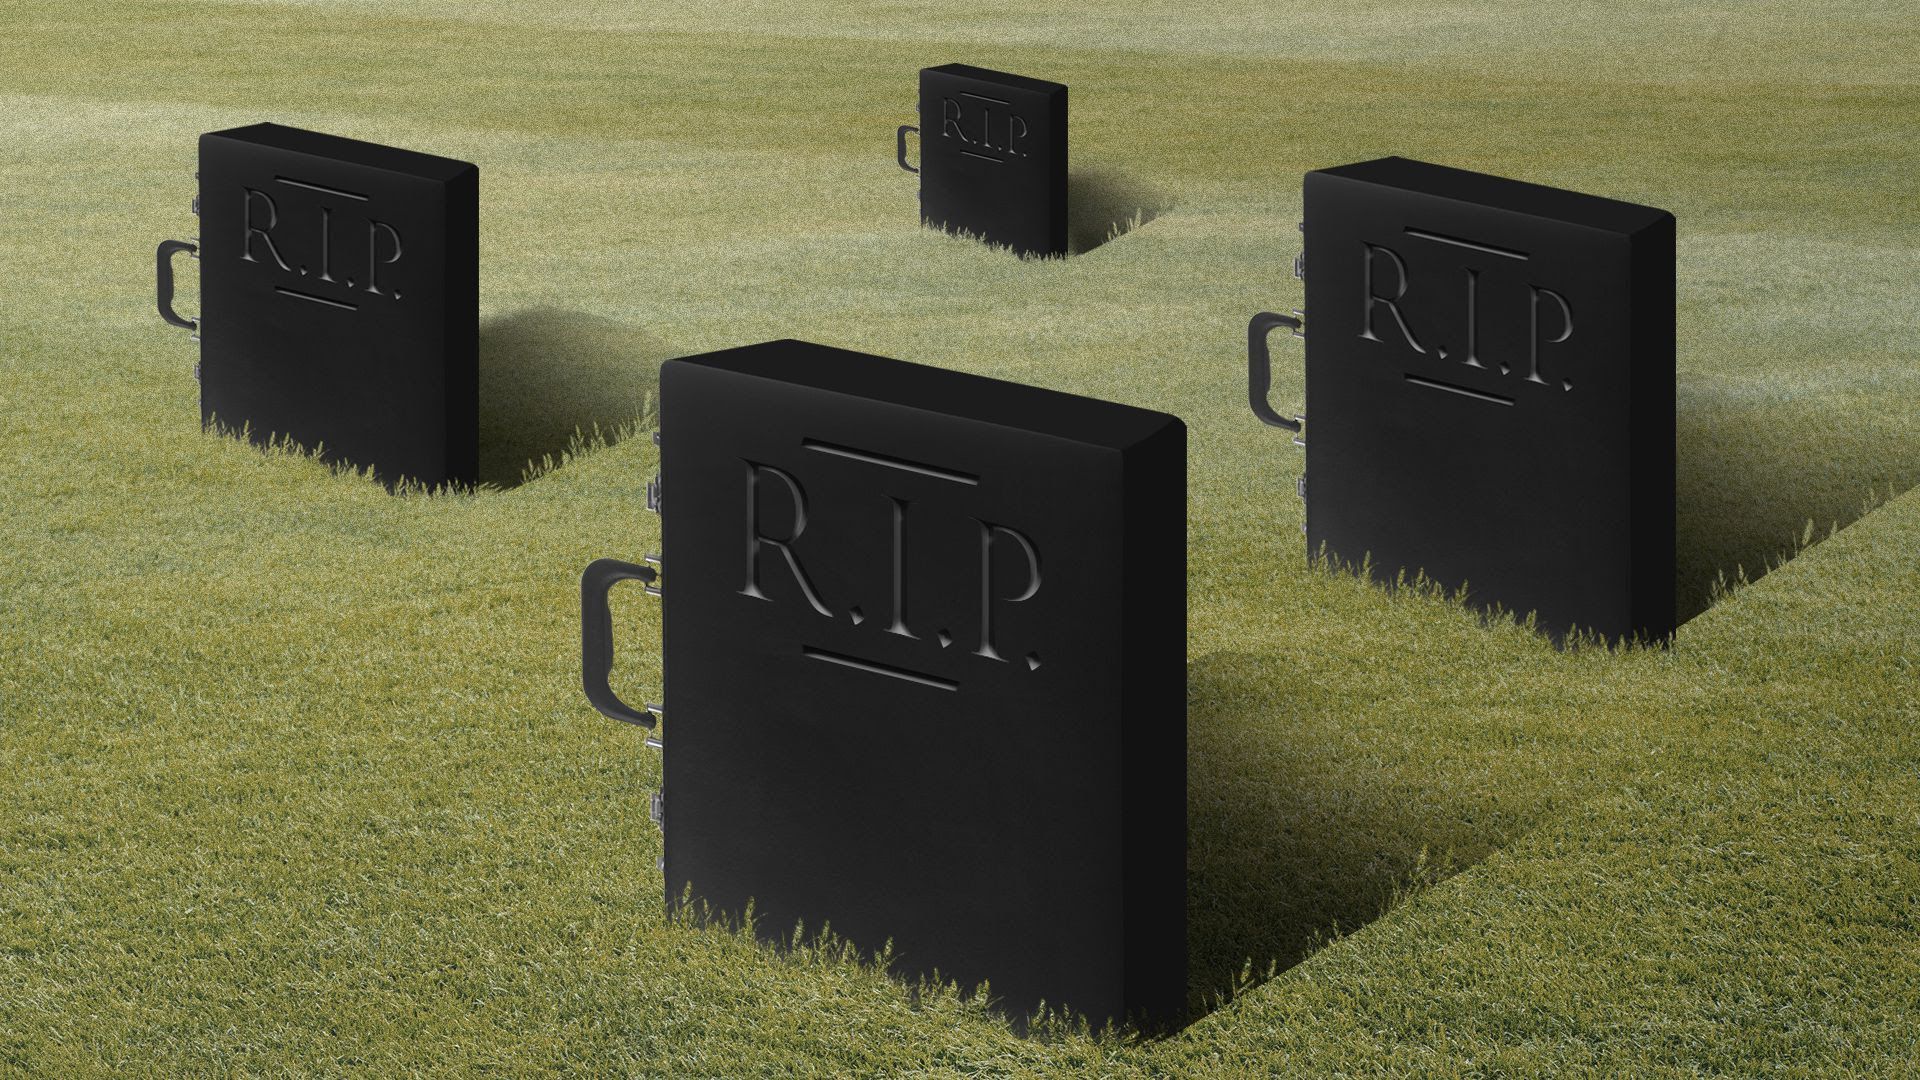 An illustration of headstones that look like briefcases